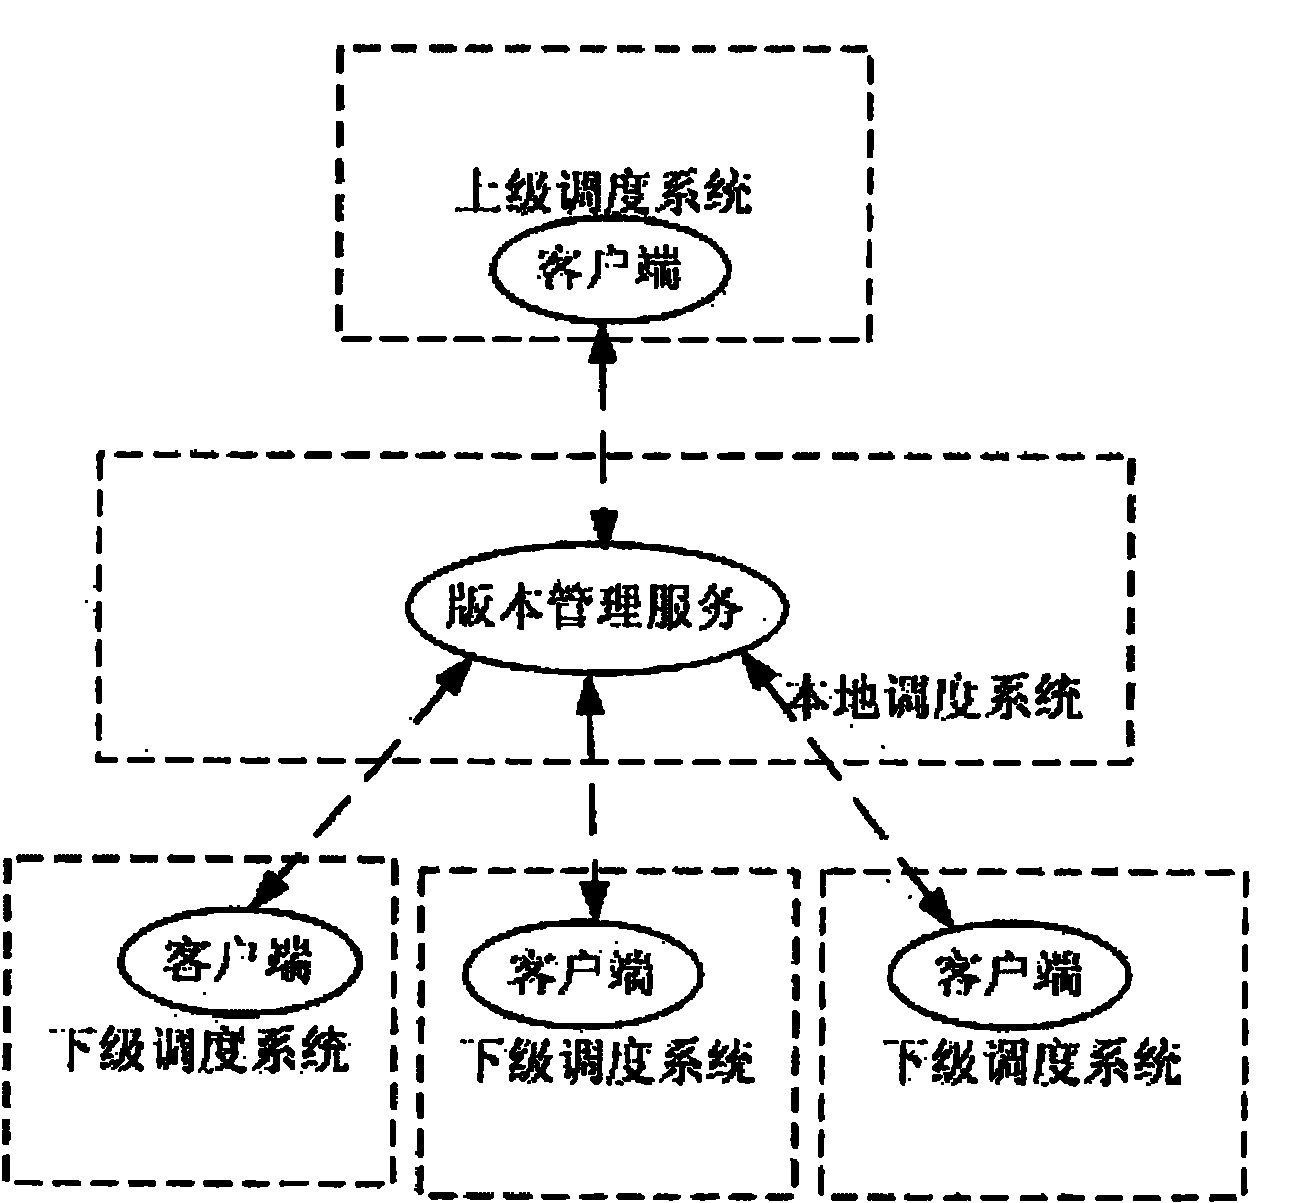 Interconnected power system oriented hierachical decomposition space-time cooperative modeling method